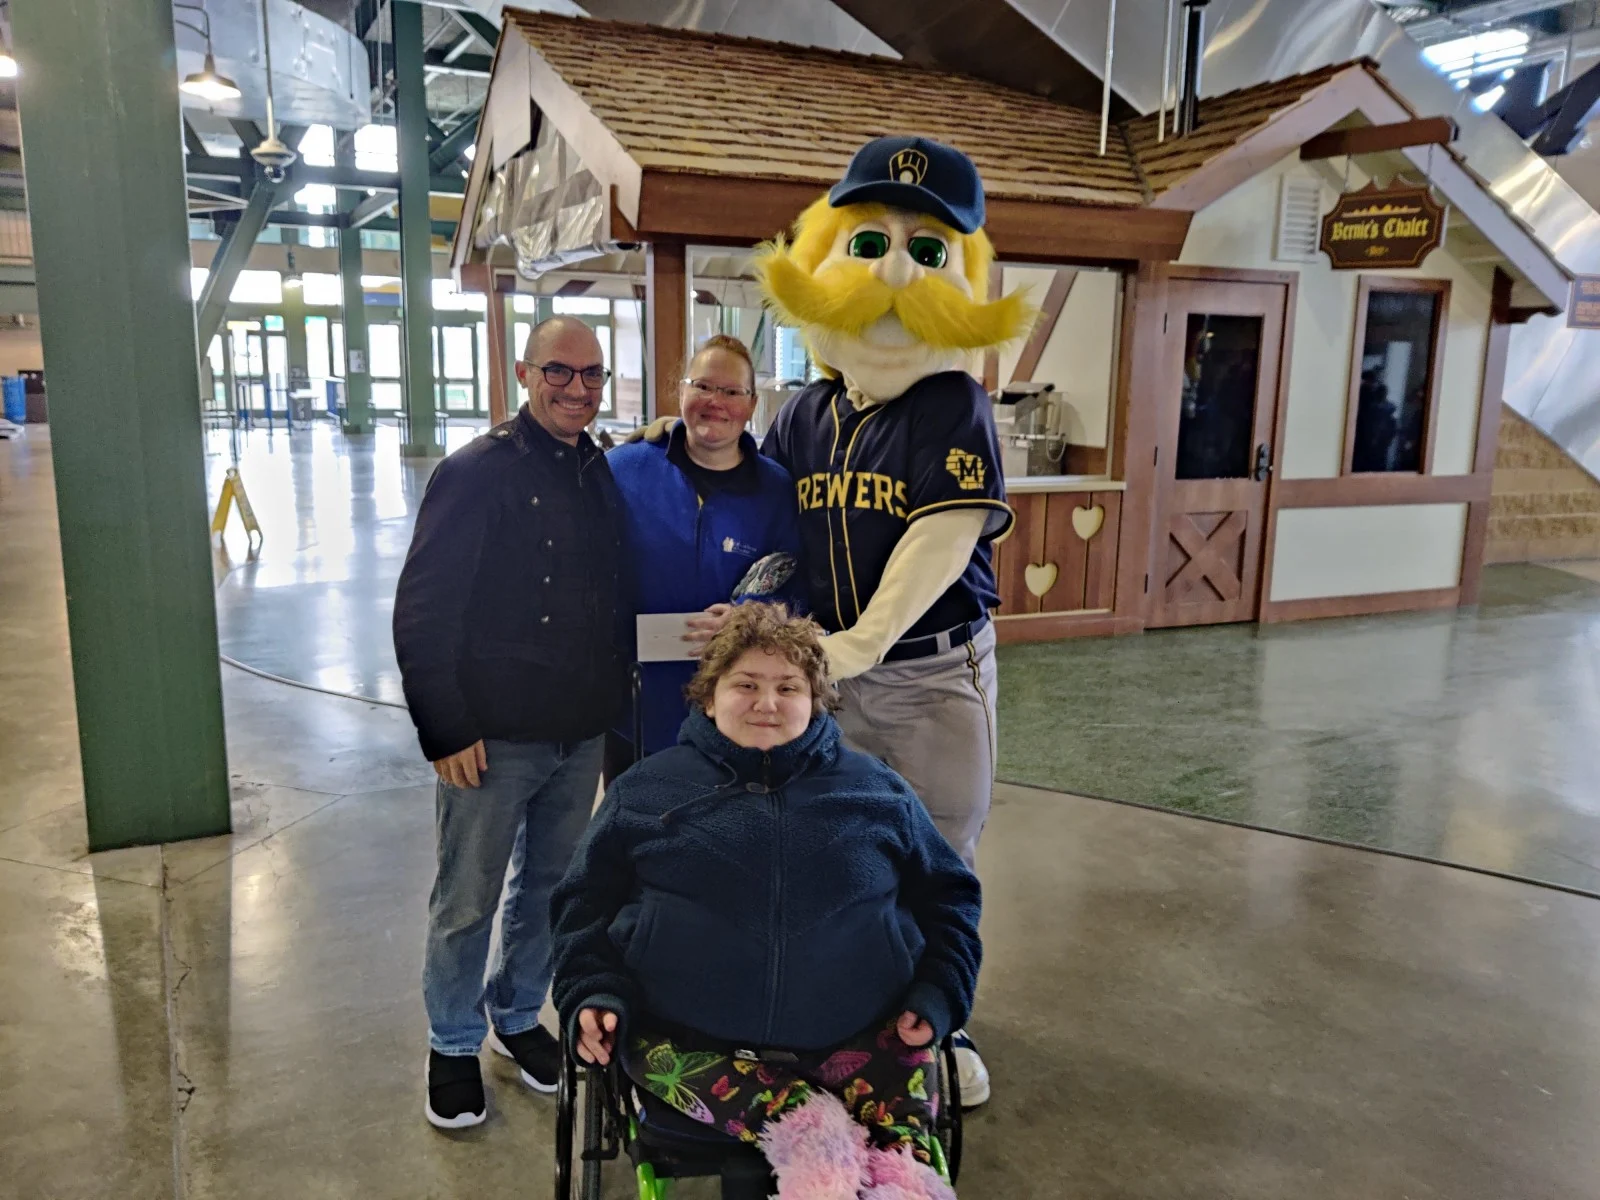 Weather Day at the Brewers game